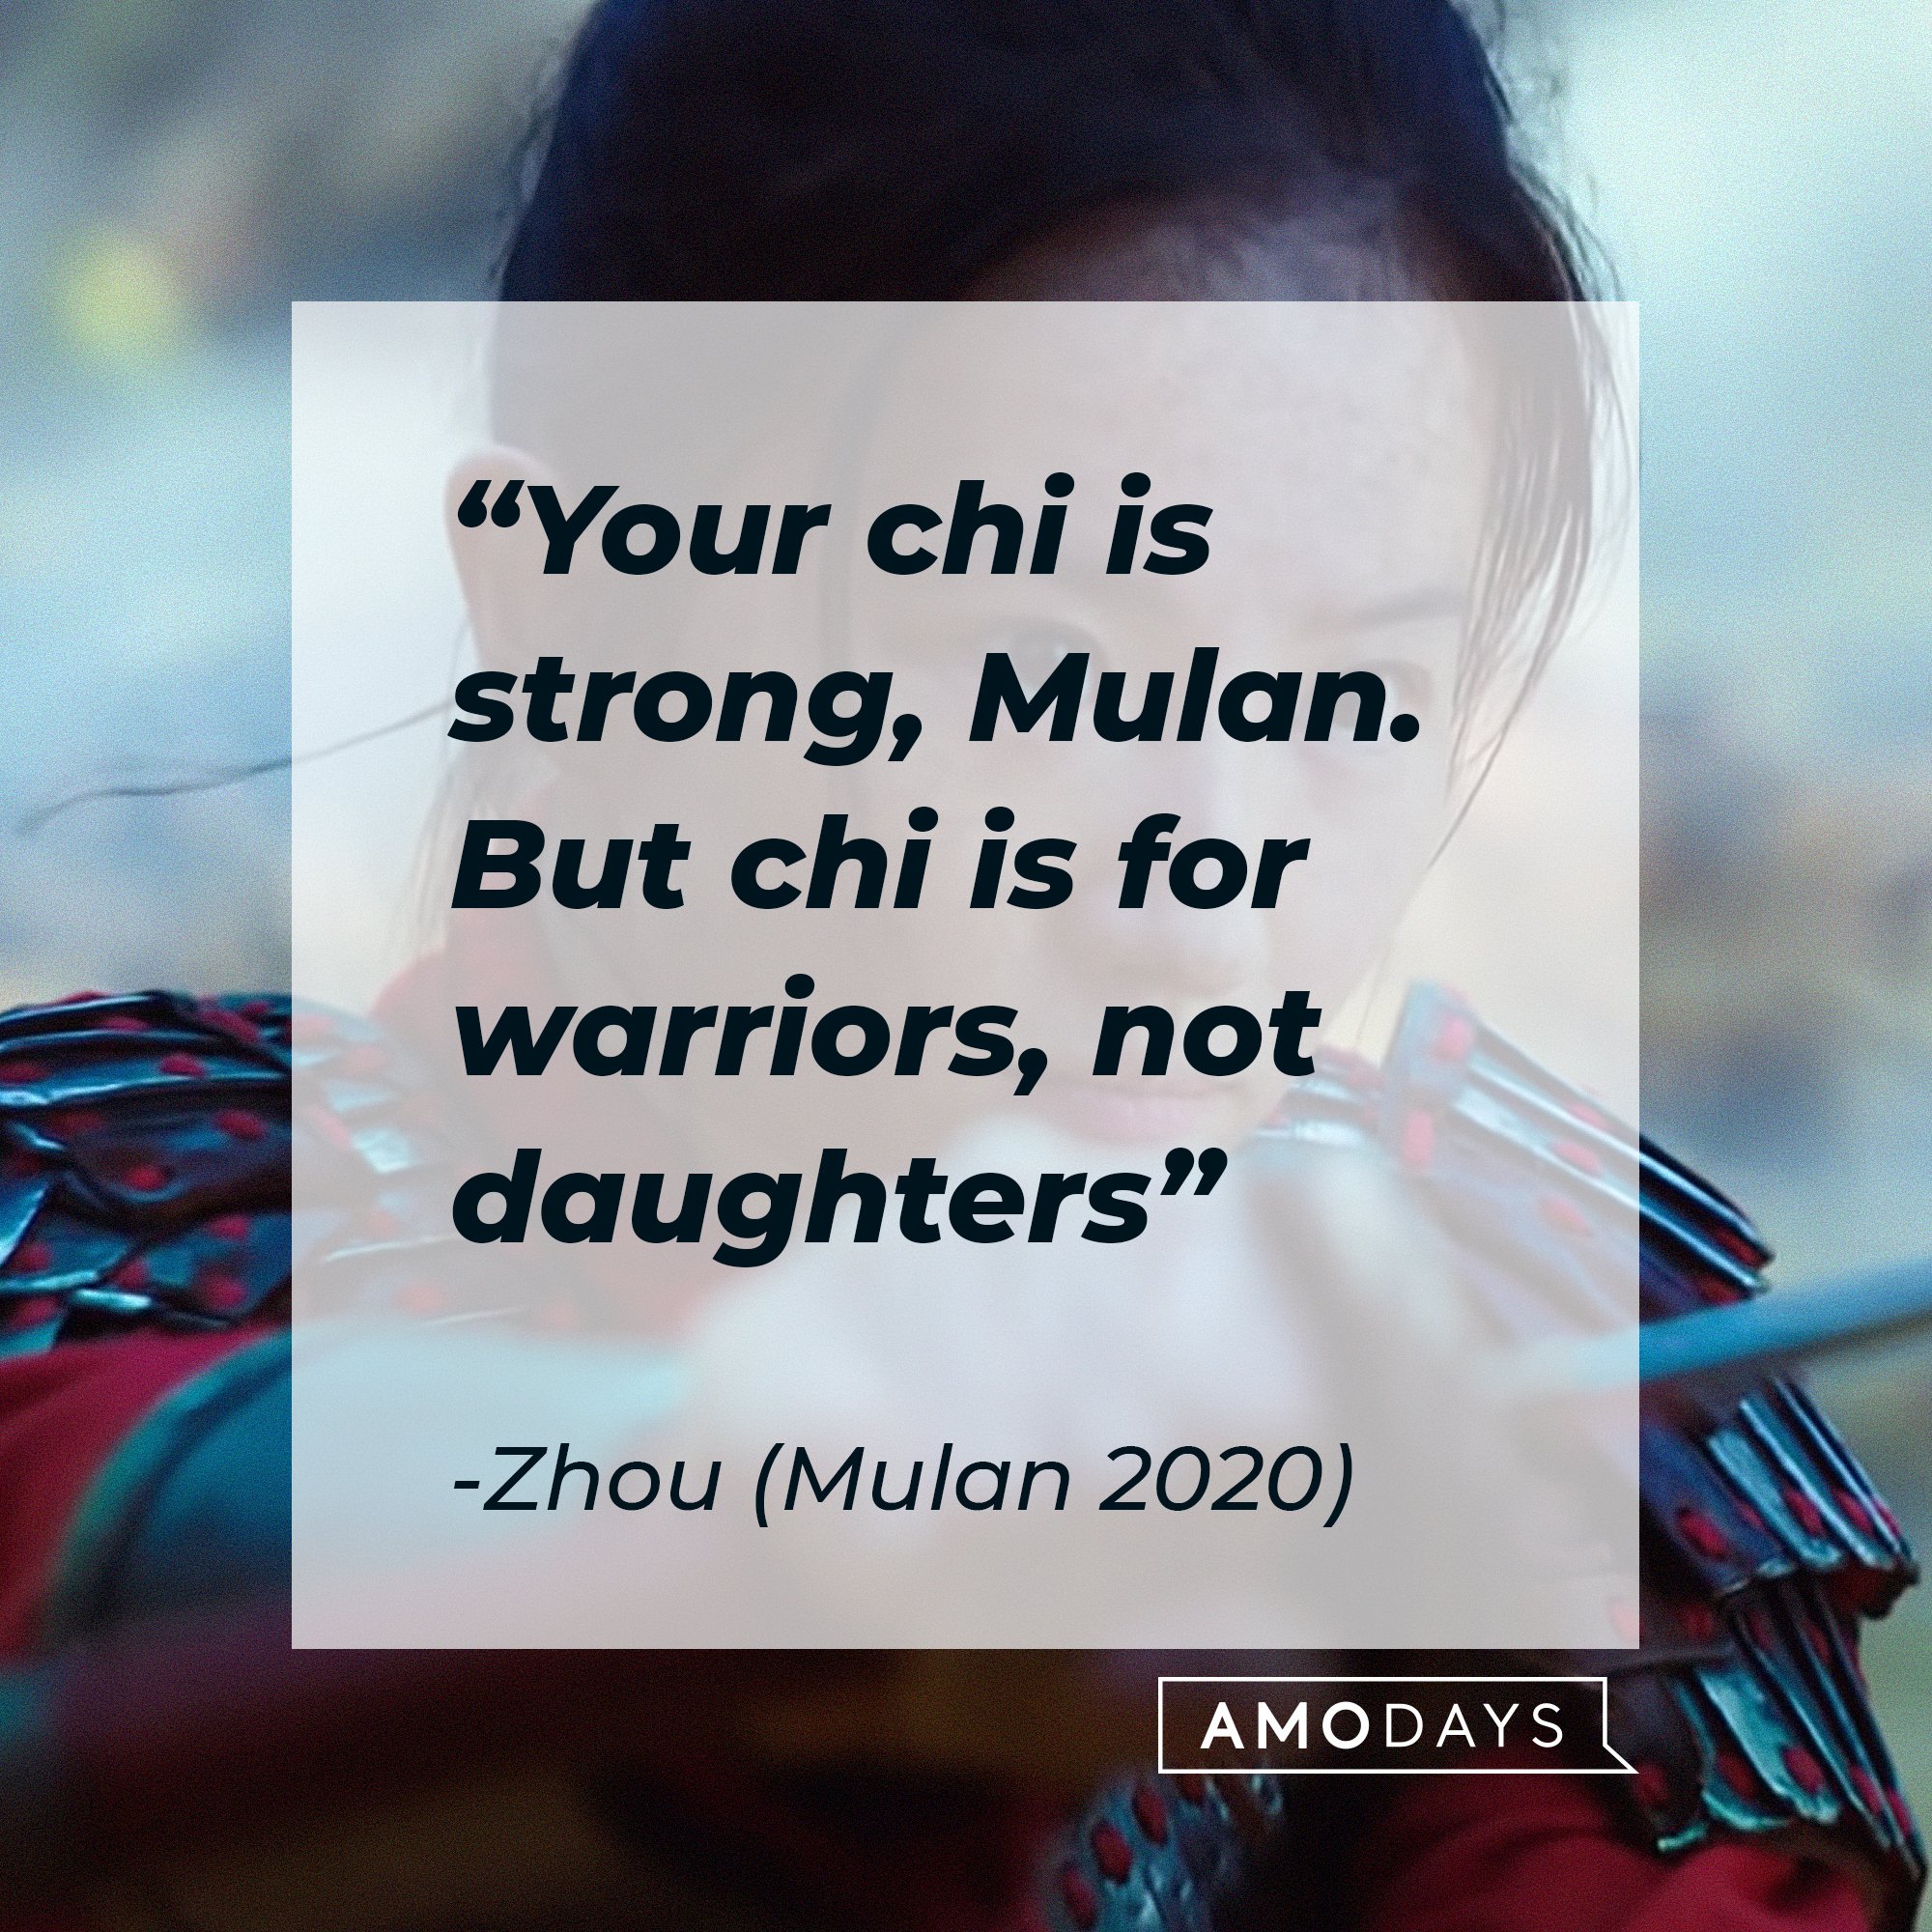  Zhou’s quote “Your chi is strong, Mulan. But chi is for warriors, not daughters."  | Image: AmoDays